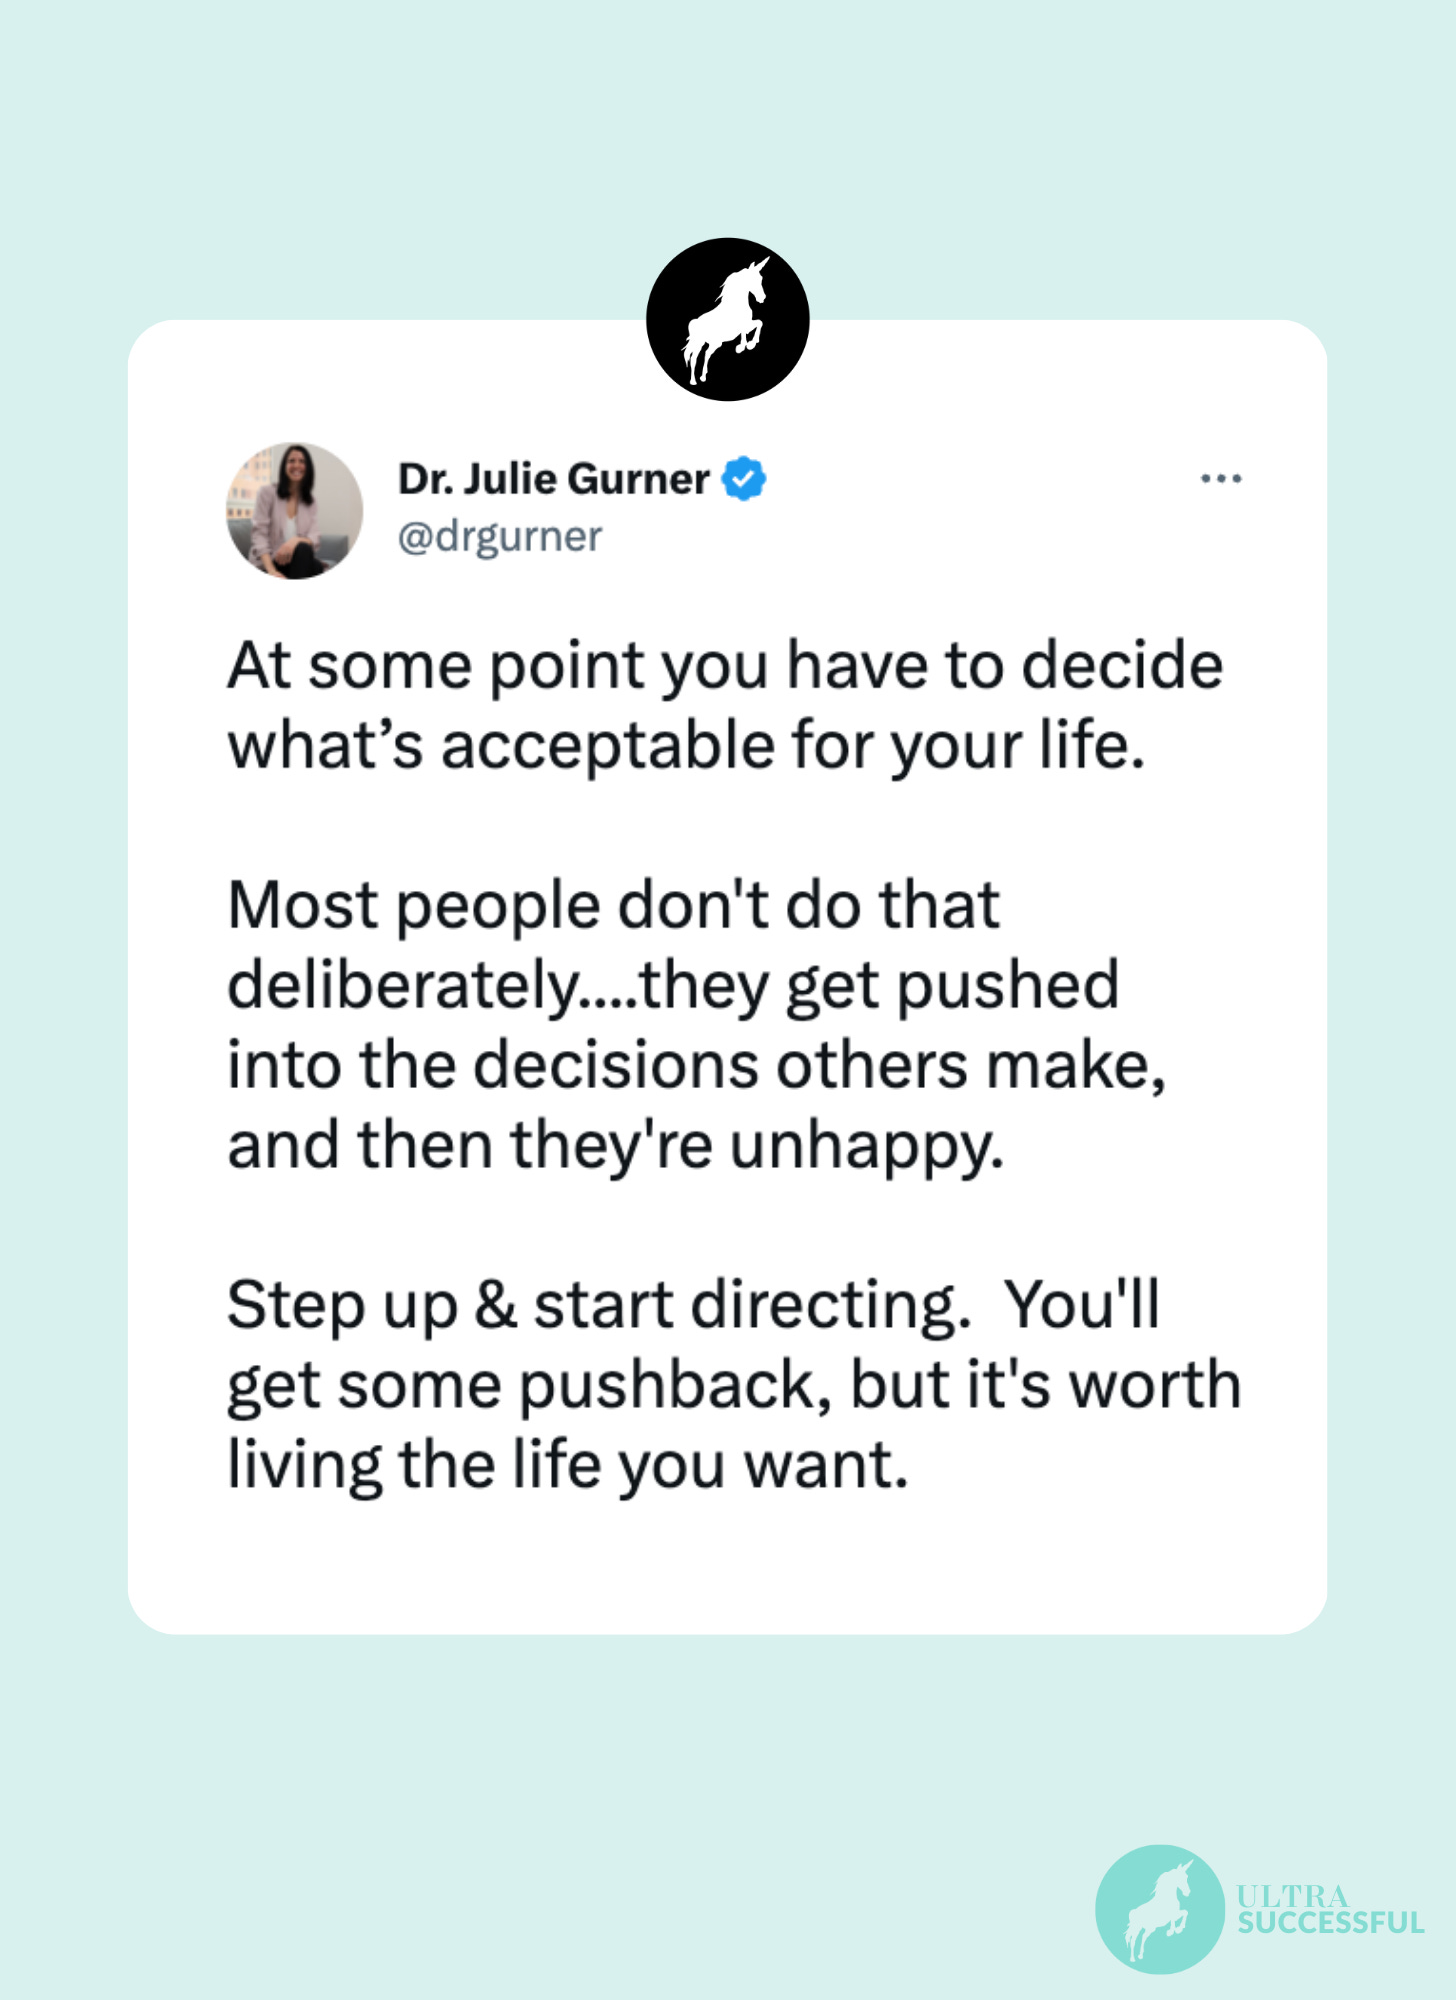 @drgurner: At some point you have to decide what’s acceptable for your life.   Most people don't do that deliberately....they get pushed into the decisions others make, and then they're unhappy.  Step up & start directing.  You'll get some pushback, but it's worth living the life you want.